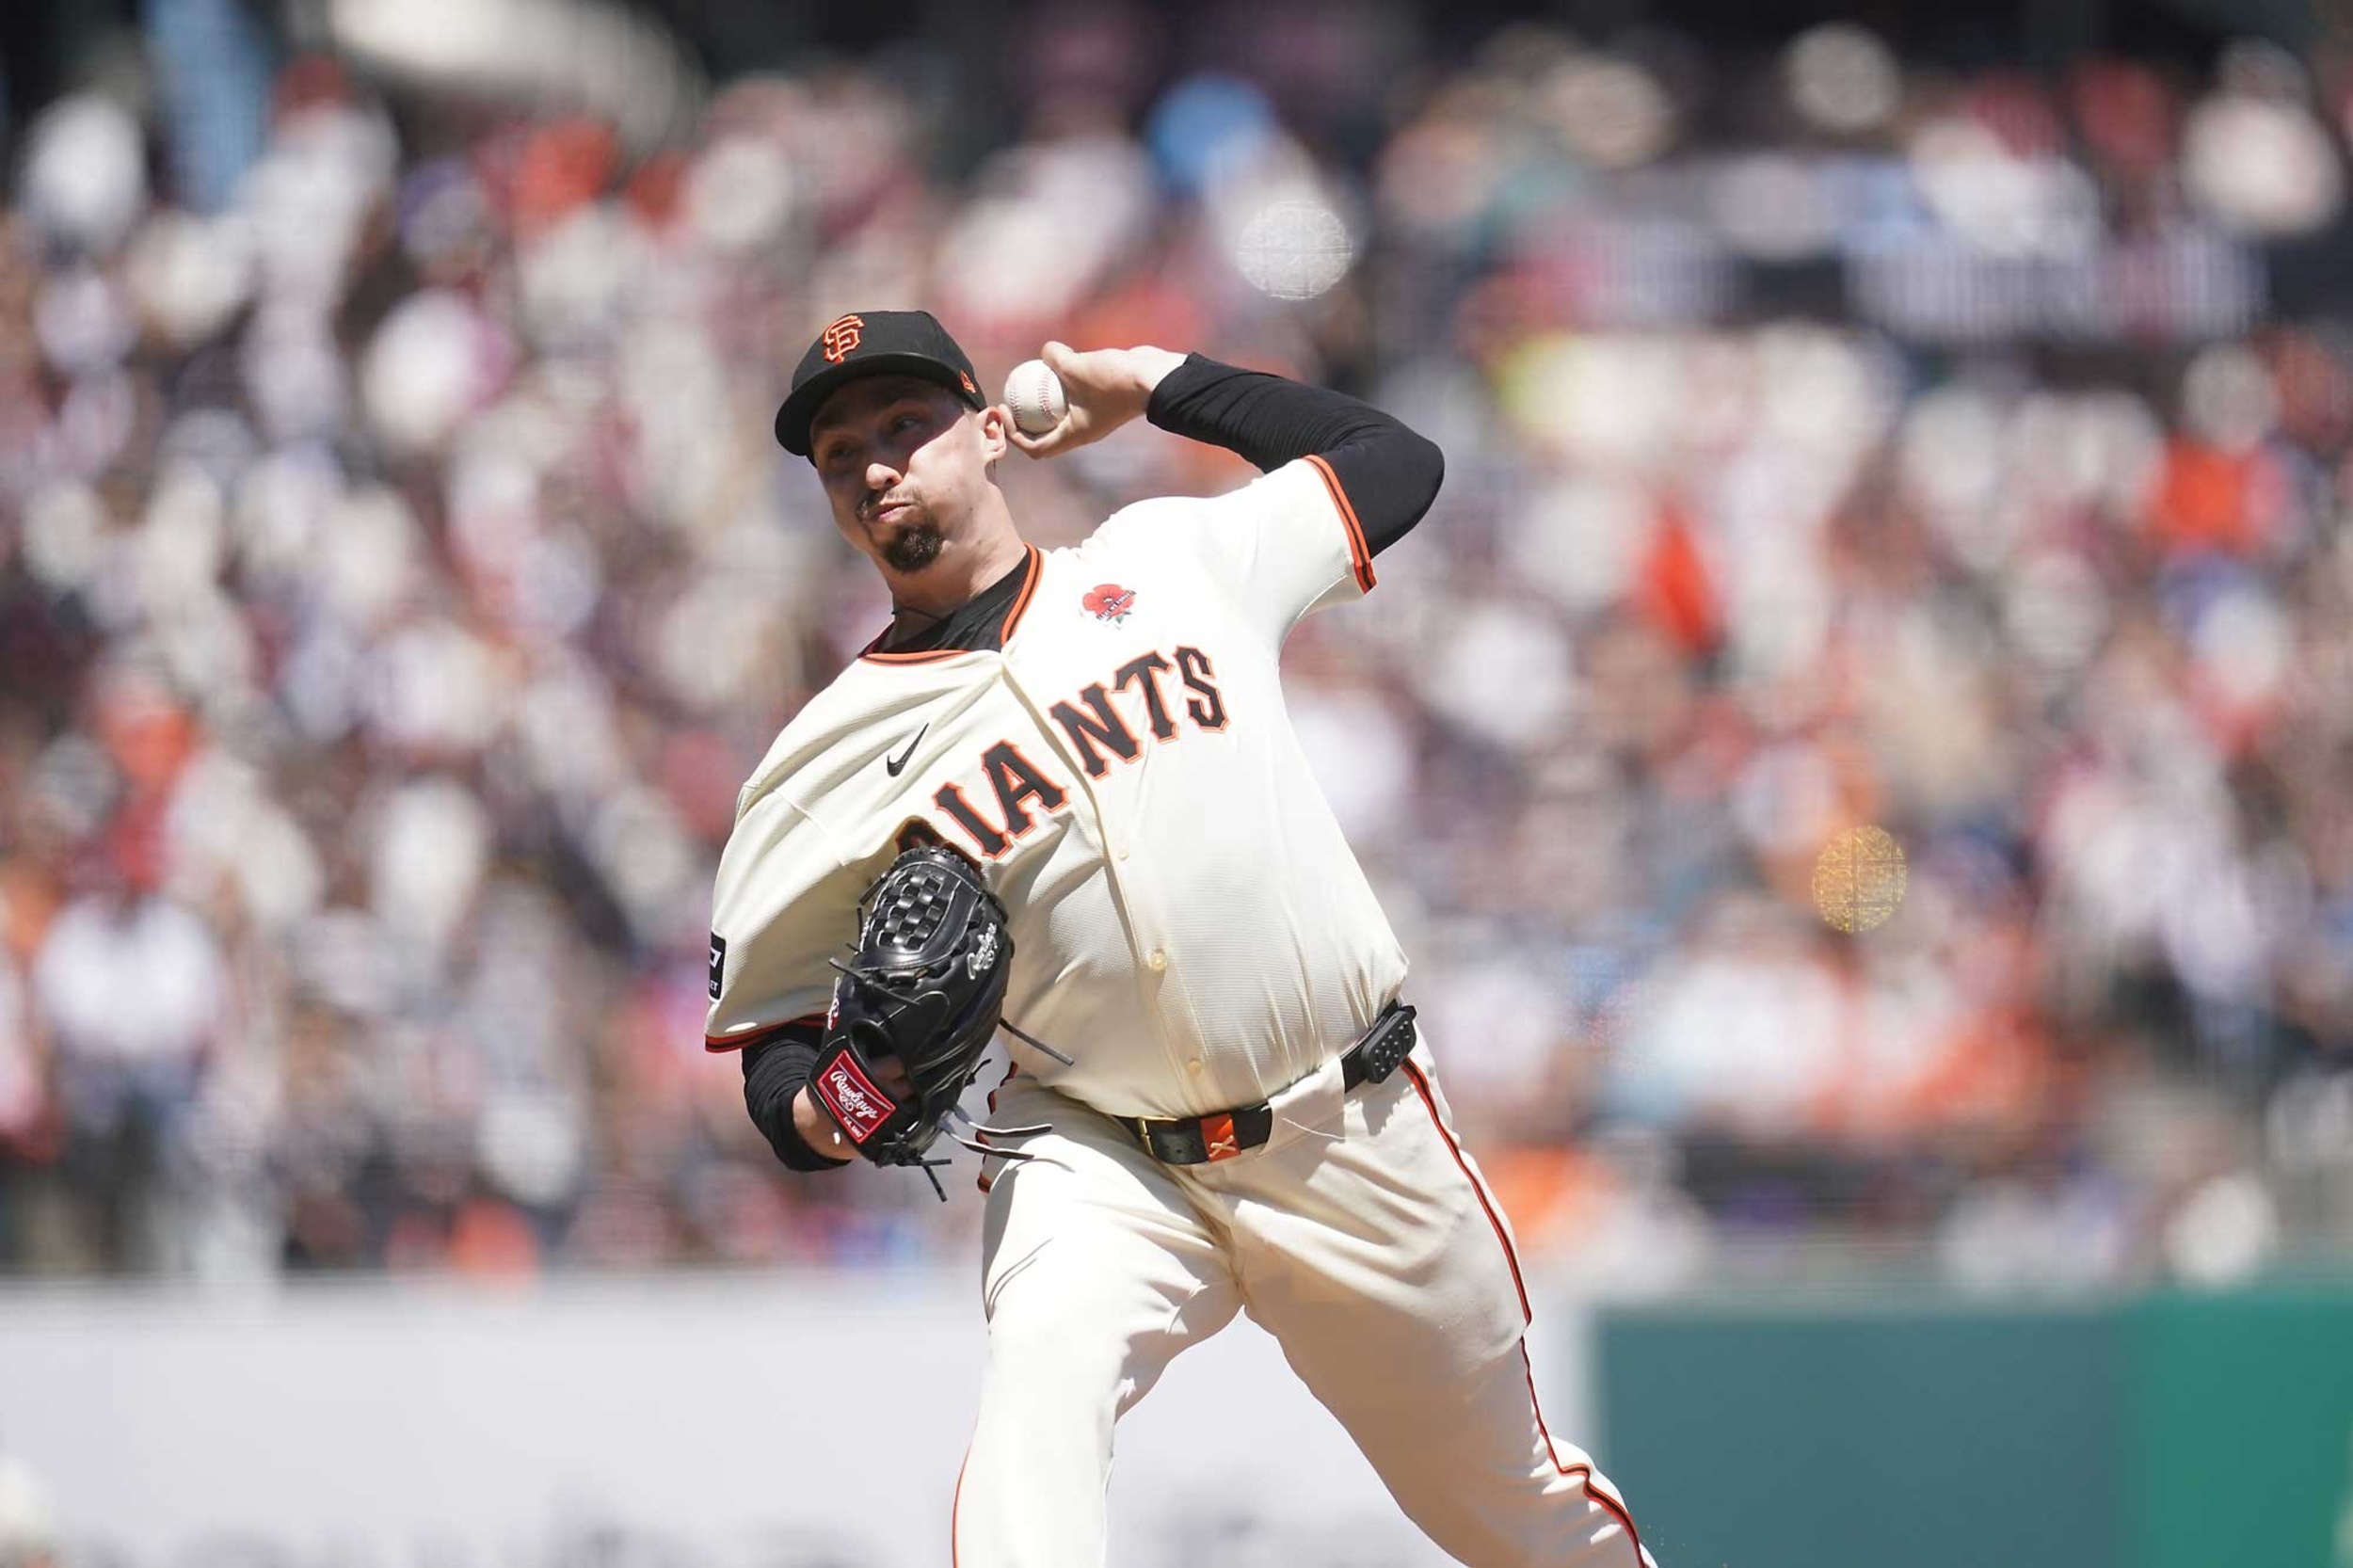 <p>Snell signed with the Giants late in Spring Training without getting the multi-year deal he craved. The lack of Spring Training innings has clearly hurt Snell, who posted a 9.51 ERA in six starts before going on the IL with a groin injury.</p><p>You may also like: <a href='https://www.yardbarker.com/mlb/articles/the_most_unlikely_world_series_heroes_of_all_time/s1__38921378'>The most unlikely World Series heroes of all time</a></p>